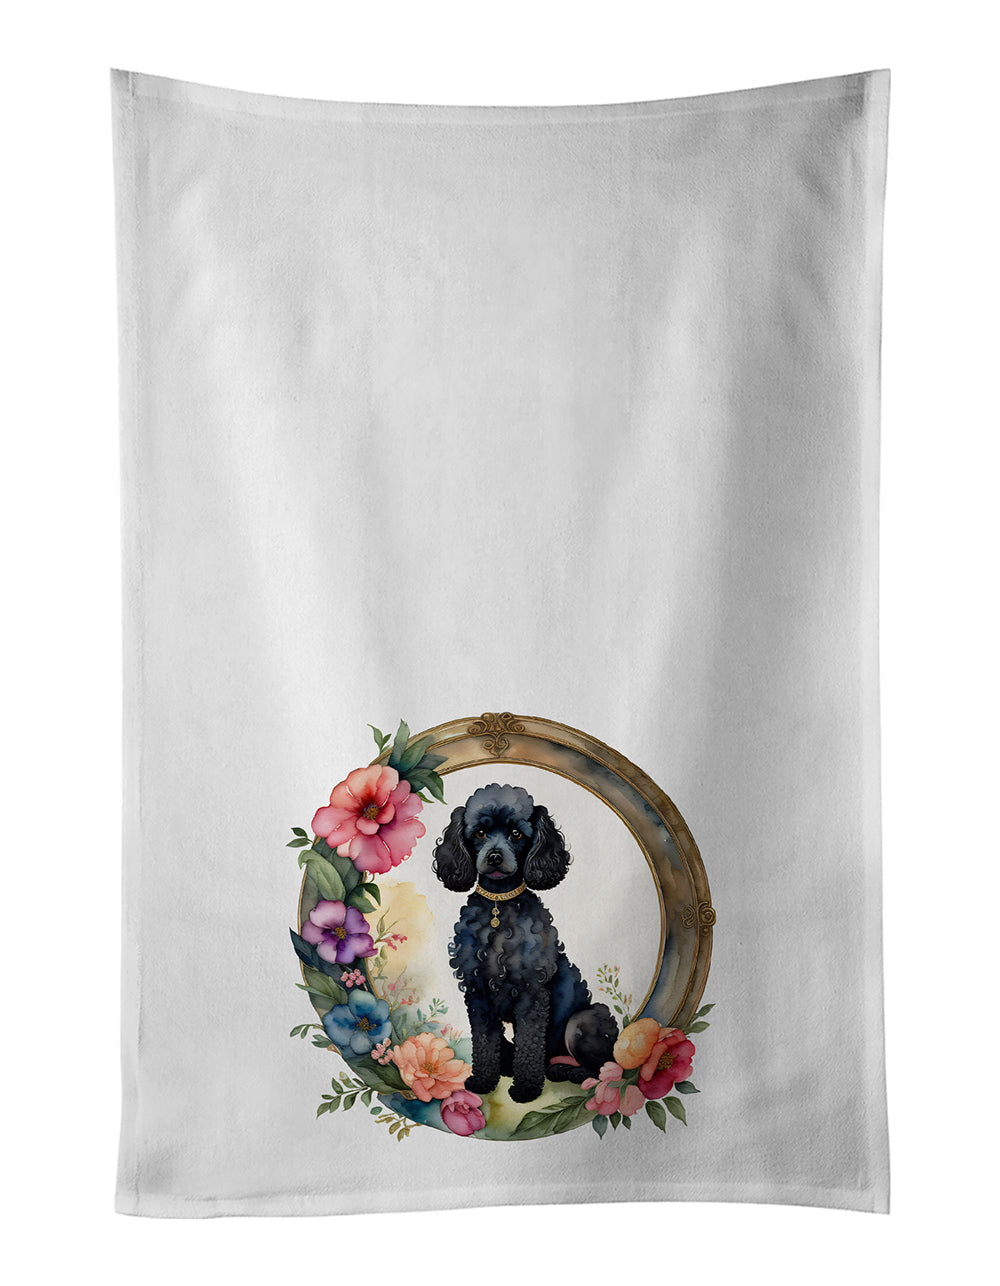 Buy this Black Poodle and Flowers Kitchen Towel Set of 2